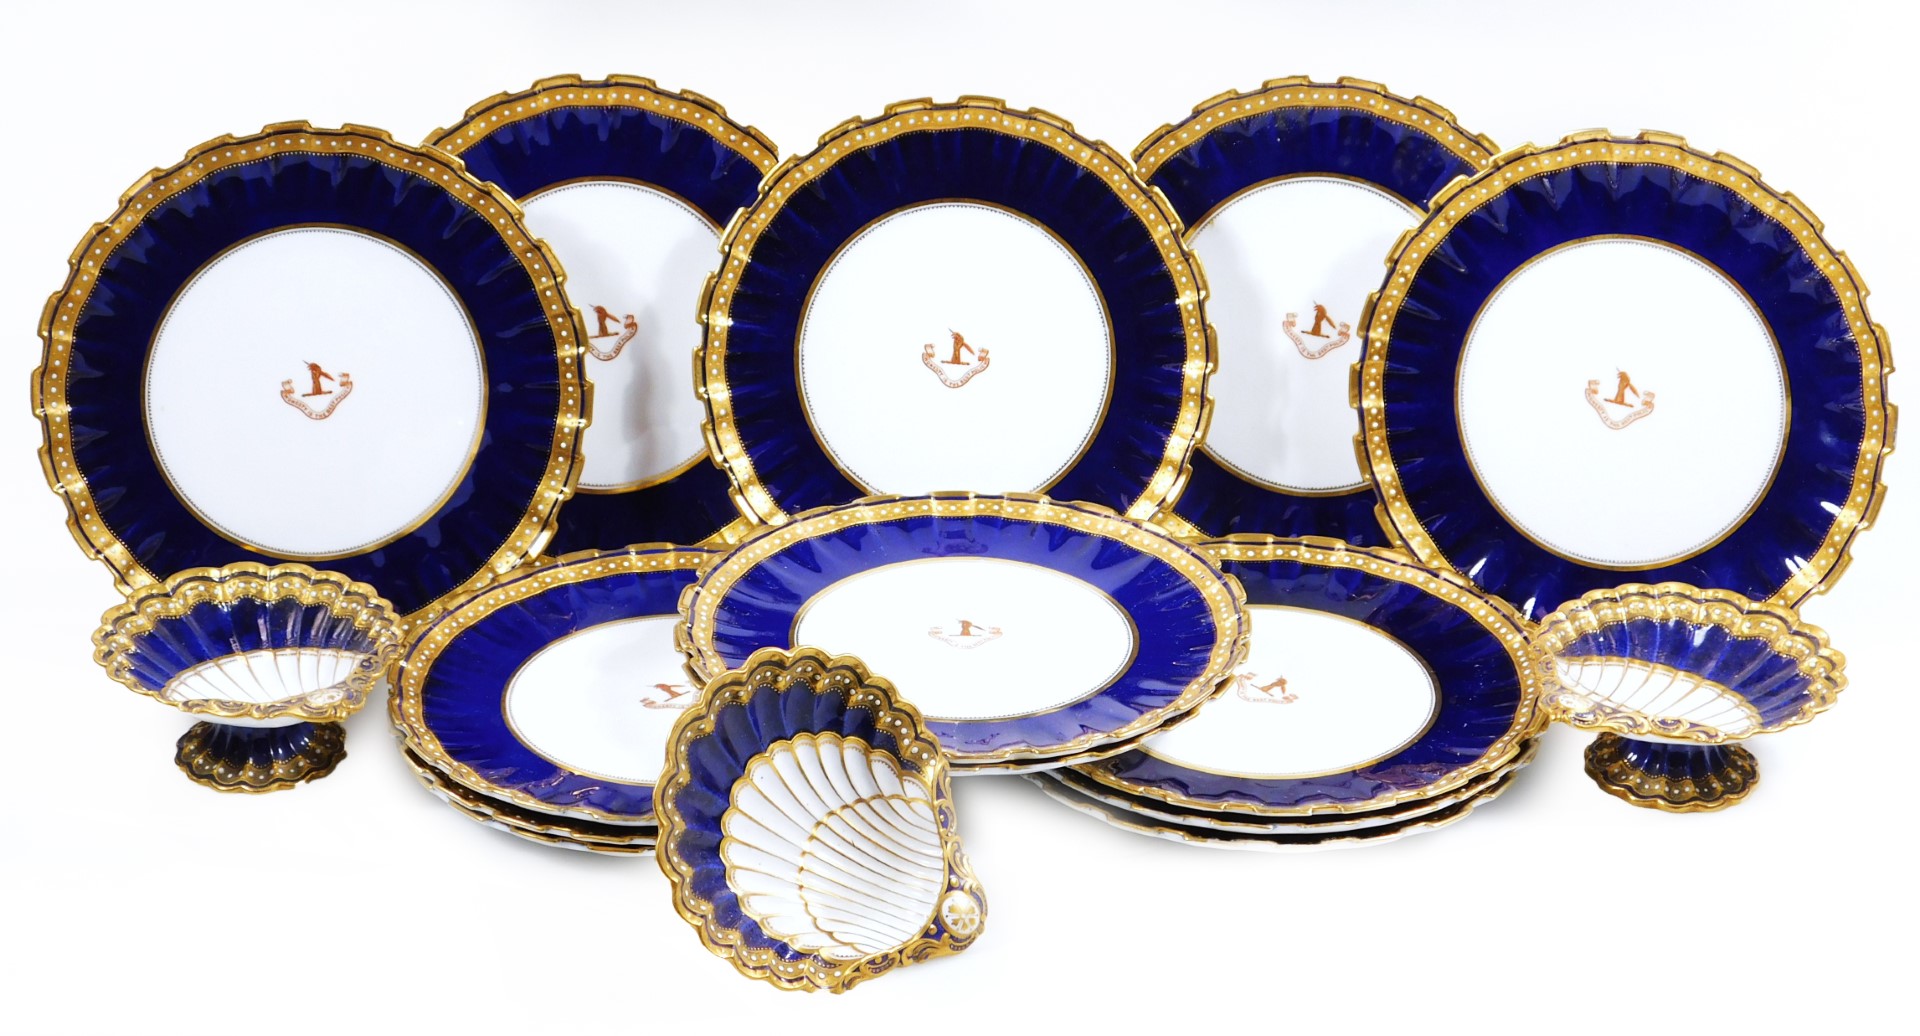 A 19thC Copeland china porcelain dessert service, set with armorial crest Honesty Is The Best